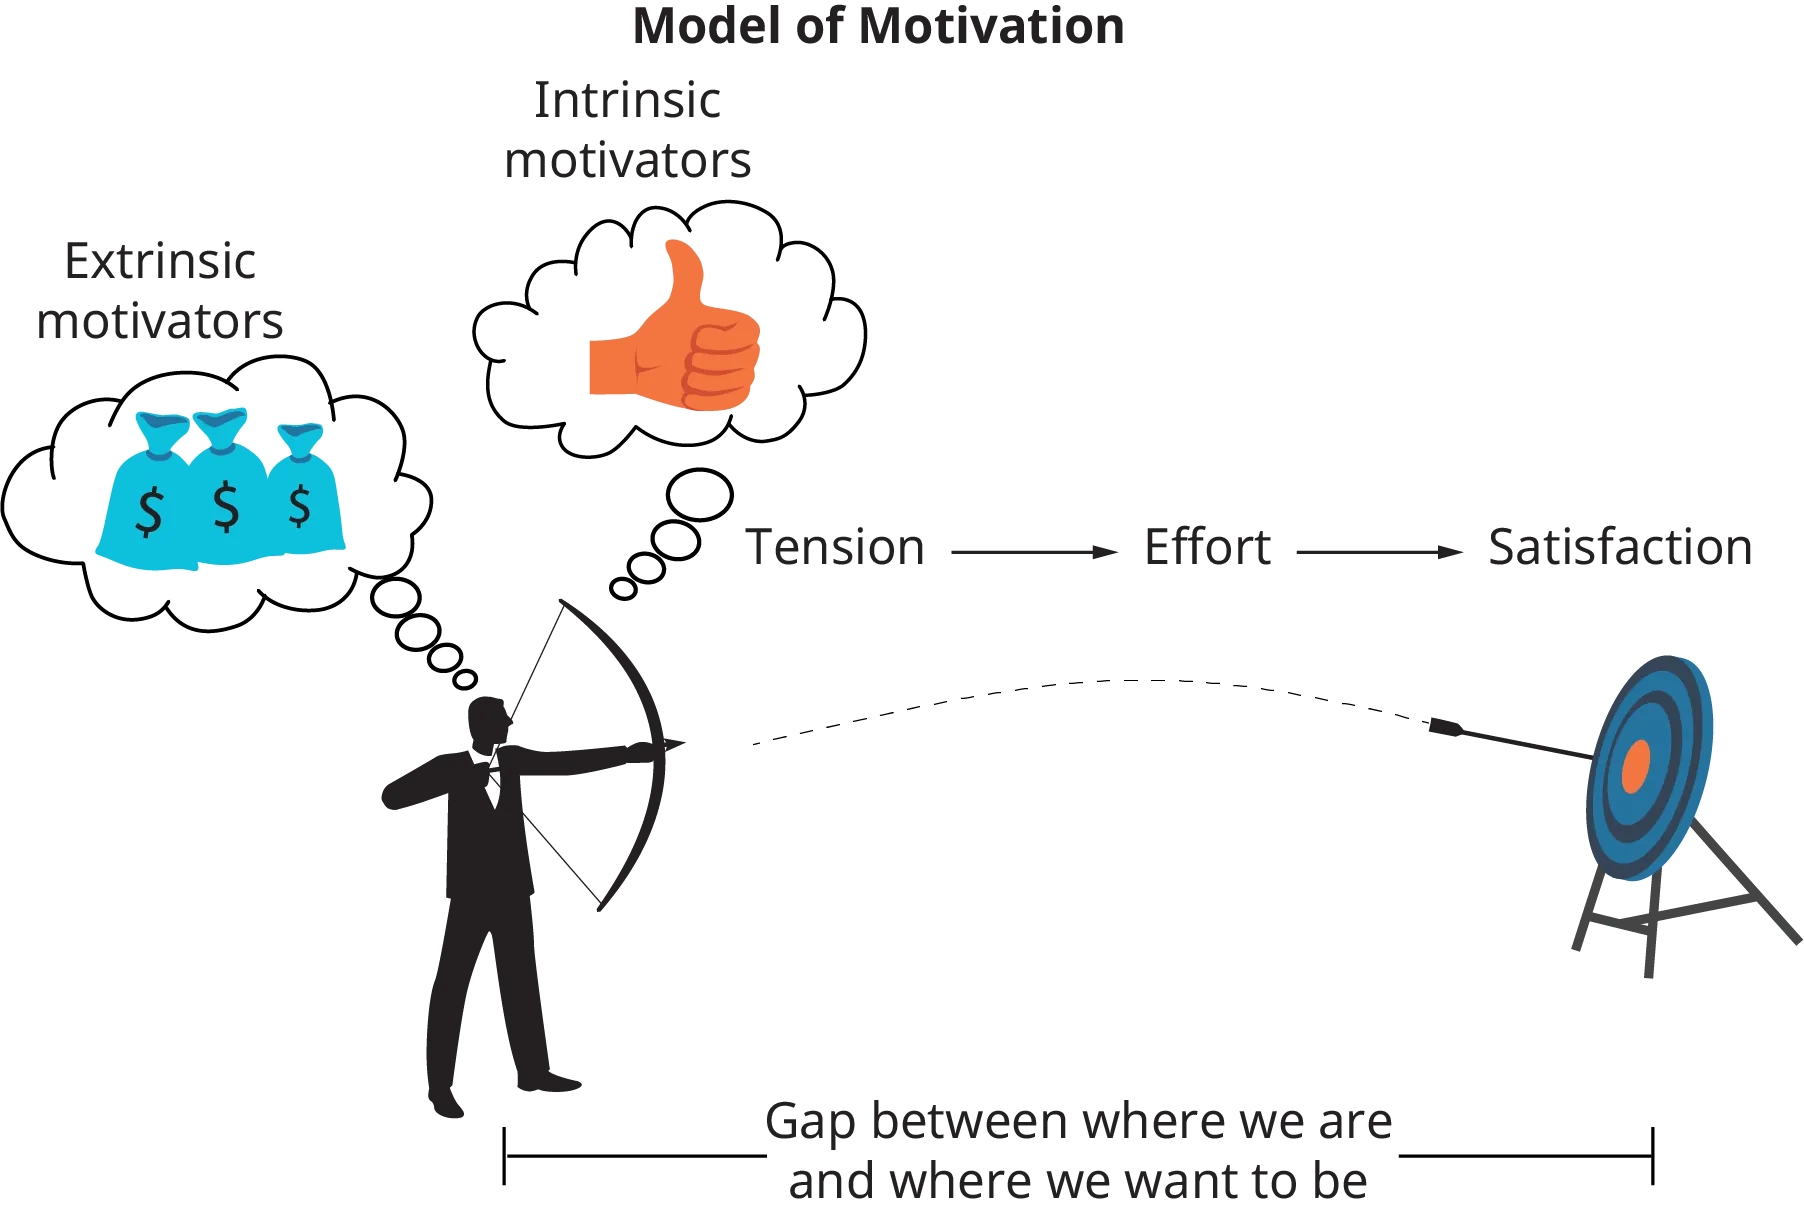 The illustration shows a man holding a bow and arrow; it is aimed at a target. There are 2 thought bubbles above the man; the first is extrinsic motivators, shown as money. The second is intrinsic motivators, shown as a thumbs up. Between the man and the target there is a bracket that reads, gap between where we are and where we and where we want to be. From left to right, the word tension flows into effort, which flows into satisfaction.